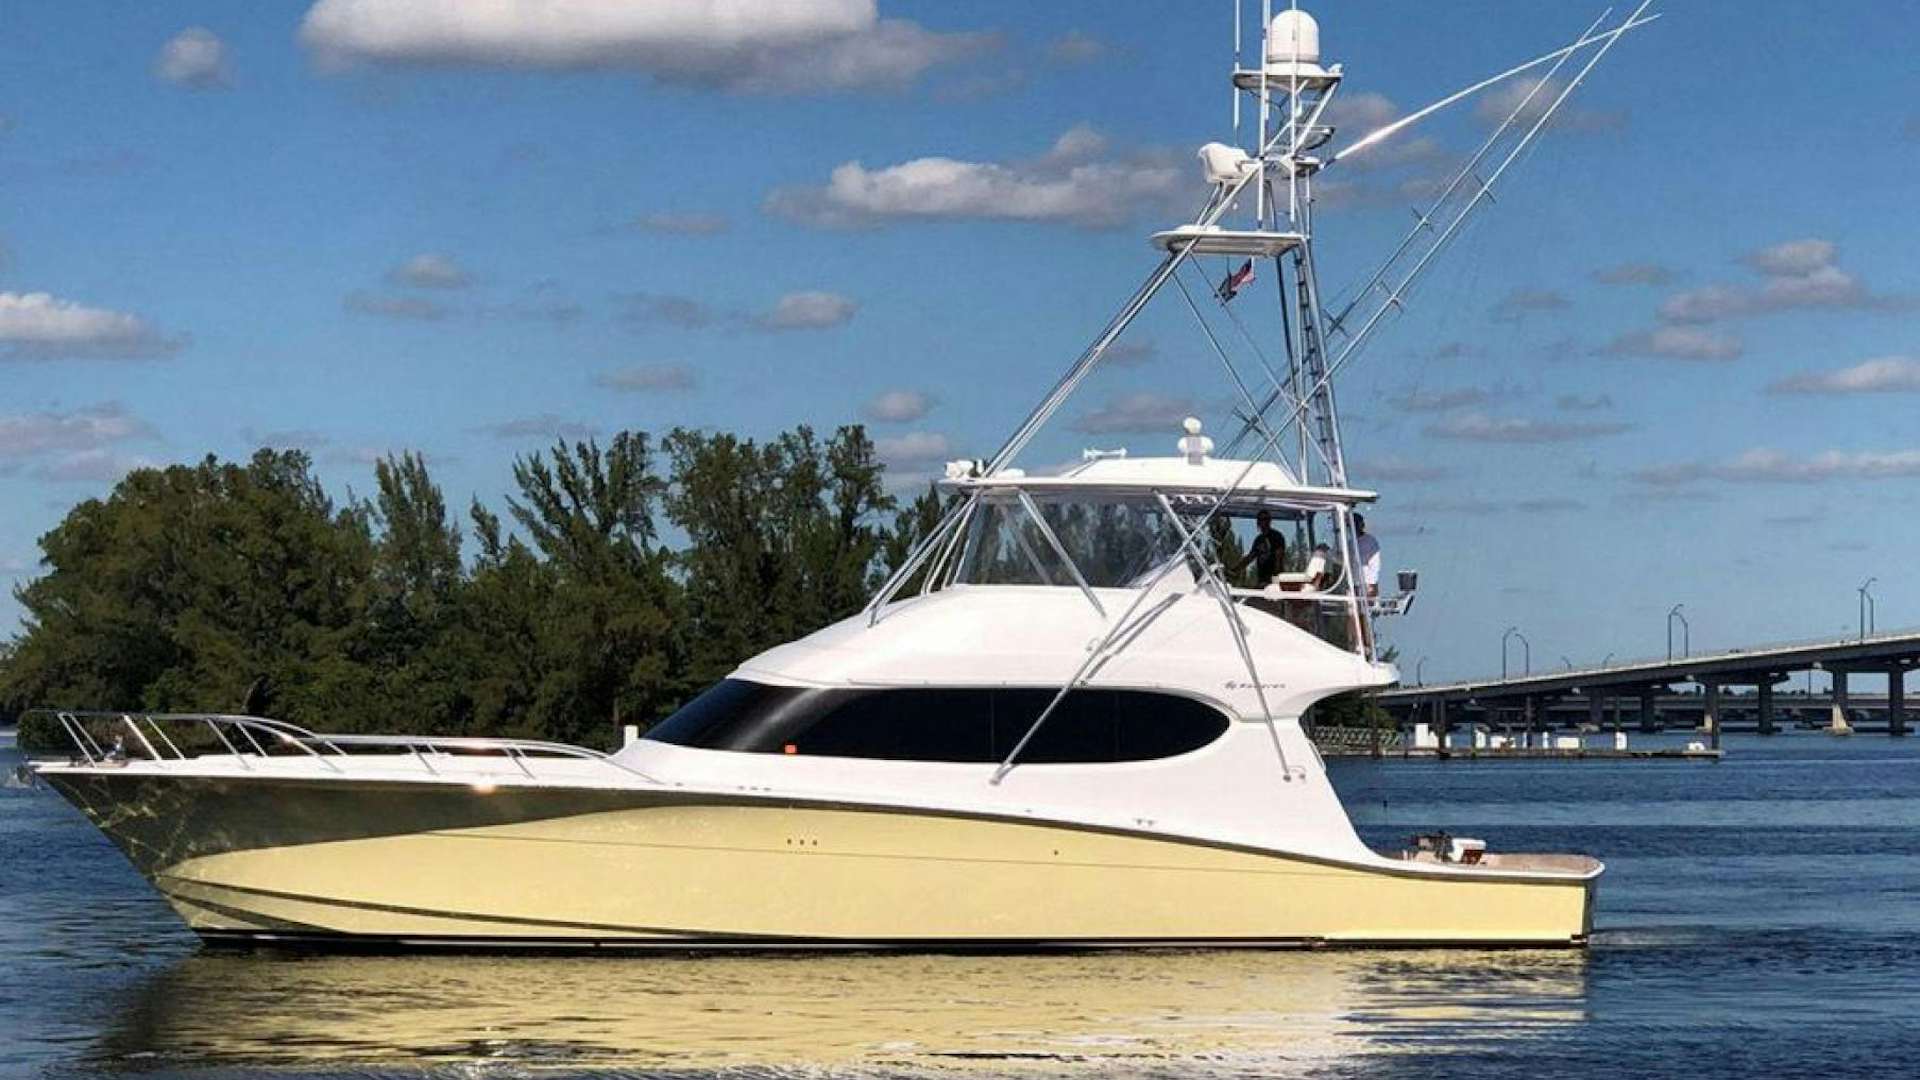 Watch Video for LYON FISH Yacht for Sale